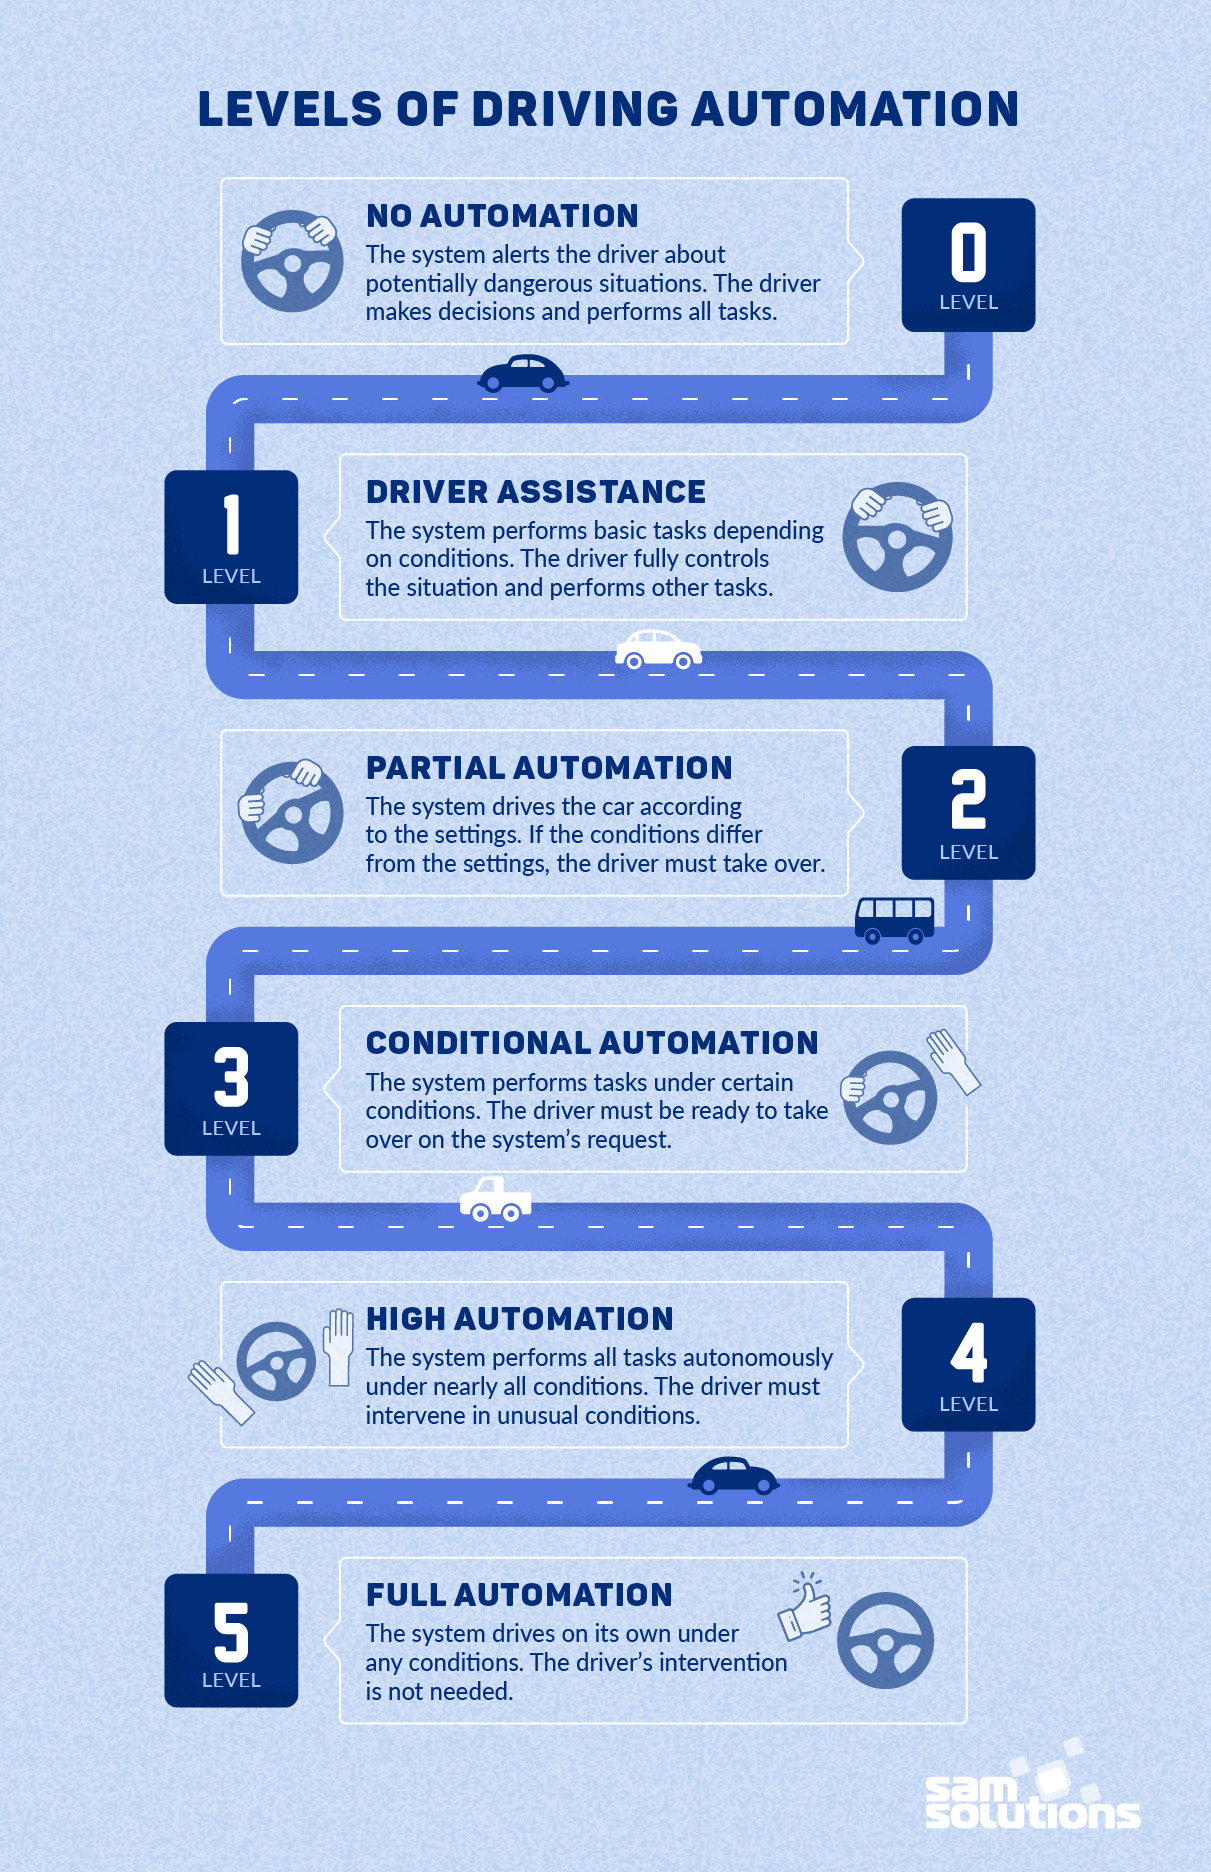 Levels-of-driving-automation-photo